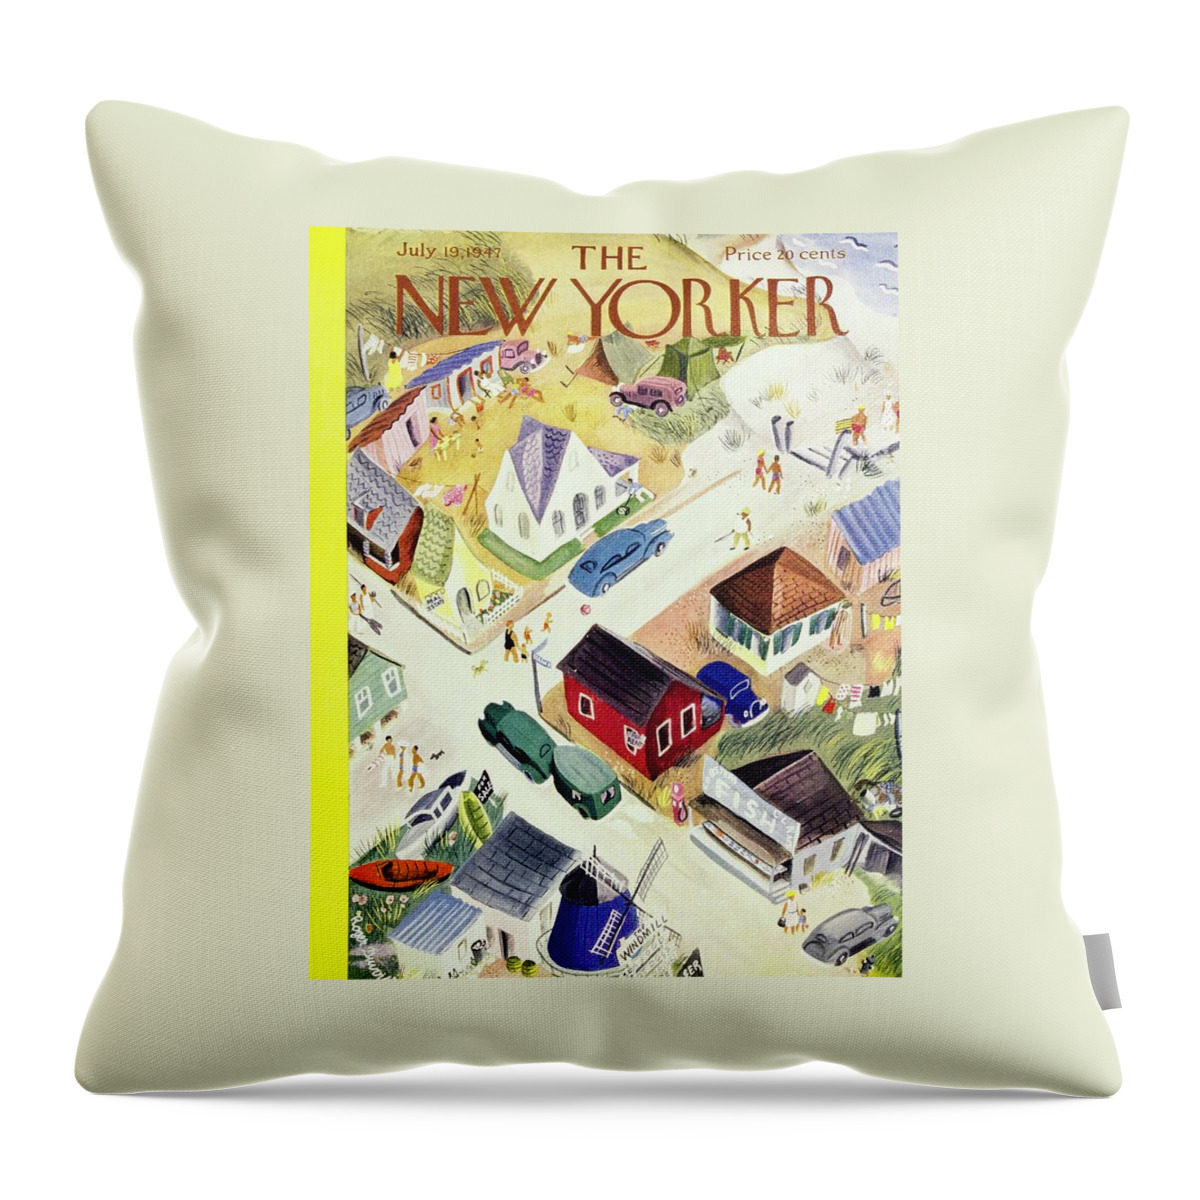 New Yorker July 19th 1947 Throw Pillow